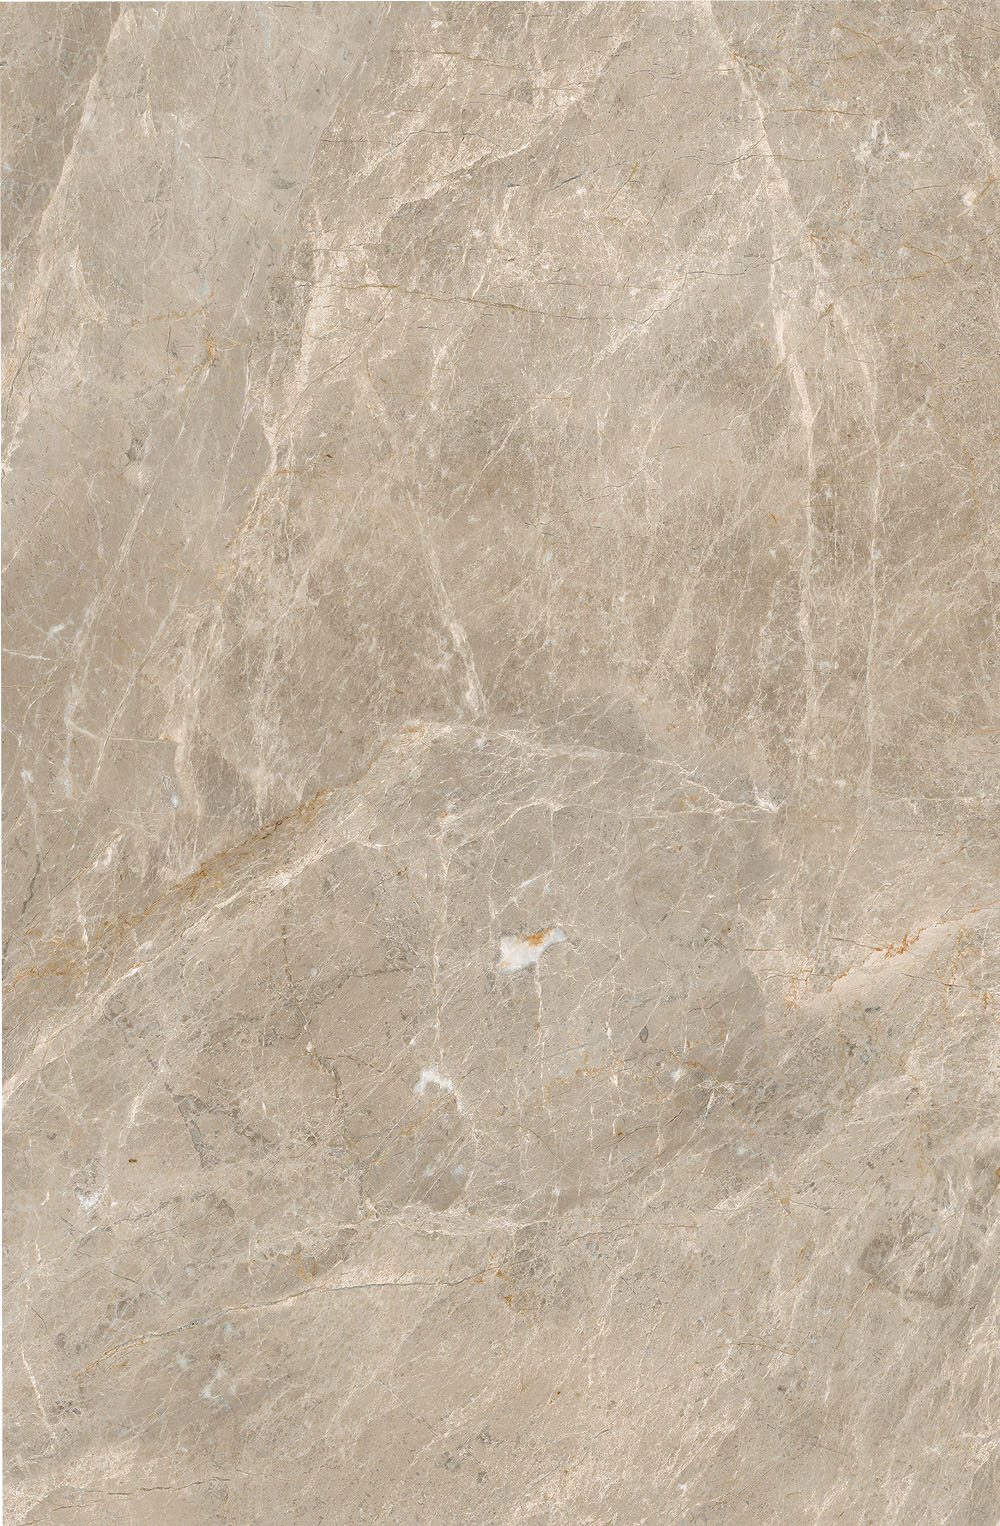 Comparison of the characteristics of thin porcelain tile and thick ceramic tiles